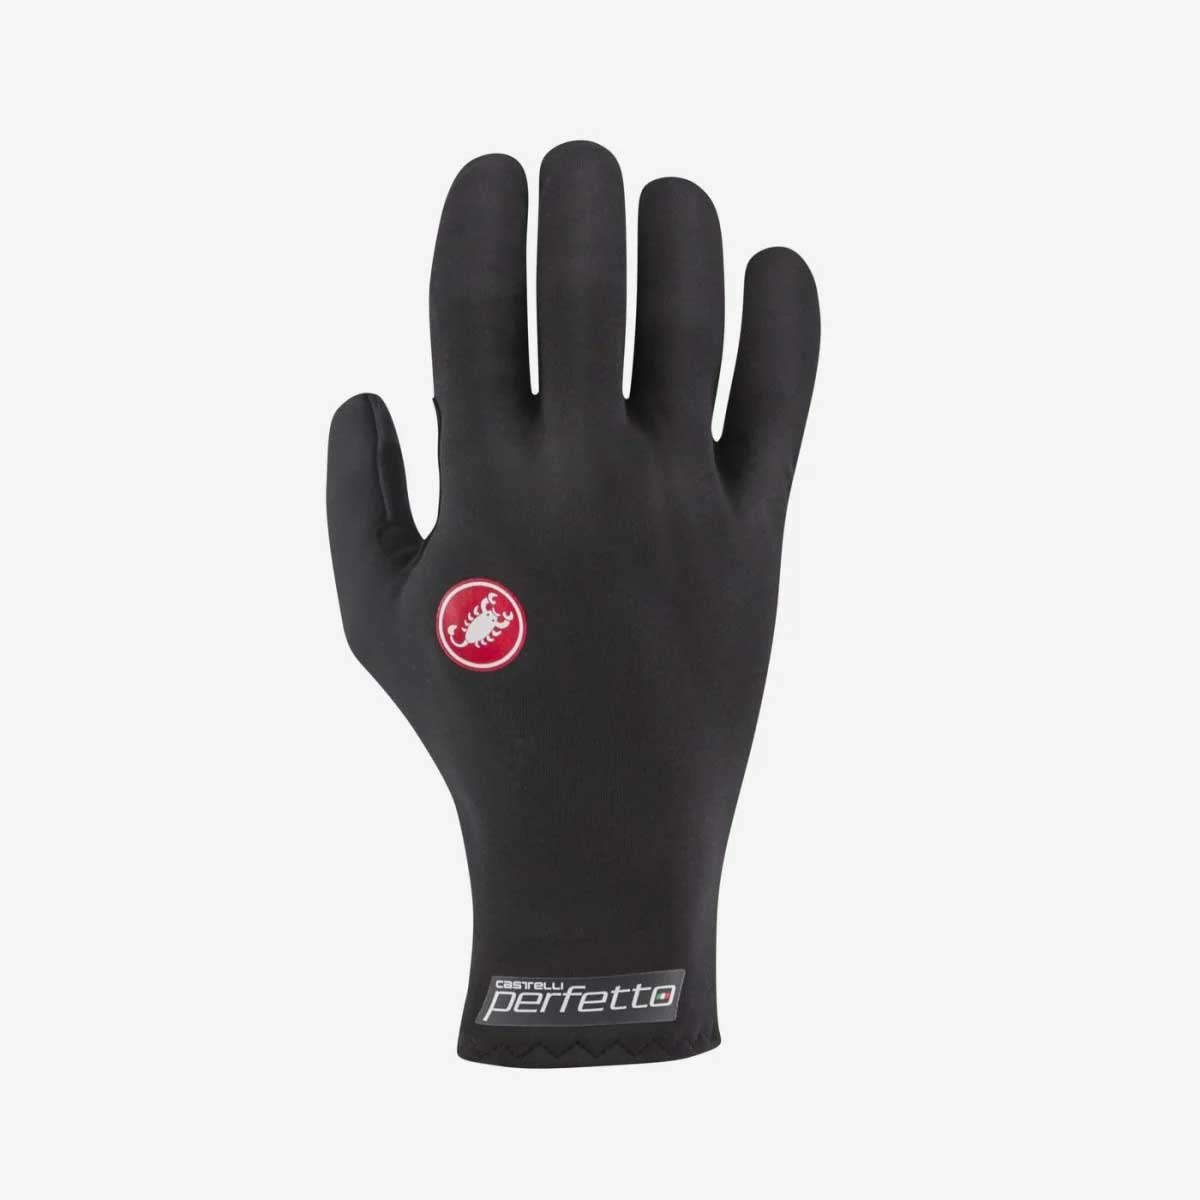 Castelli Perfetto RoS Cycling Glove – all3sports